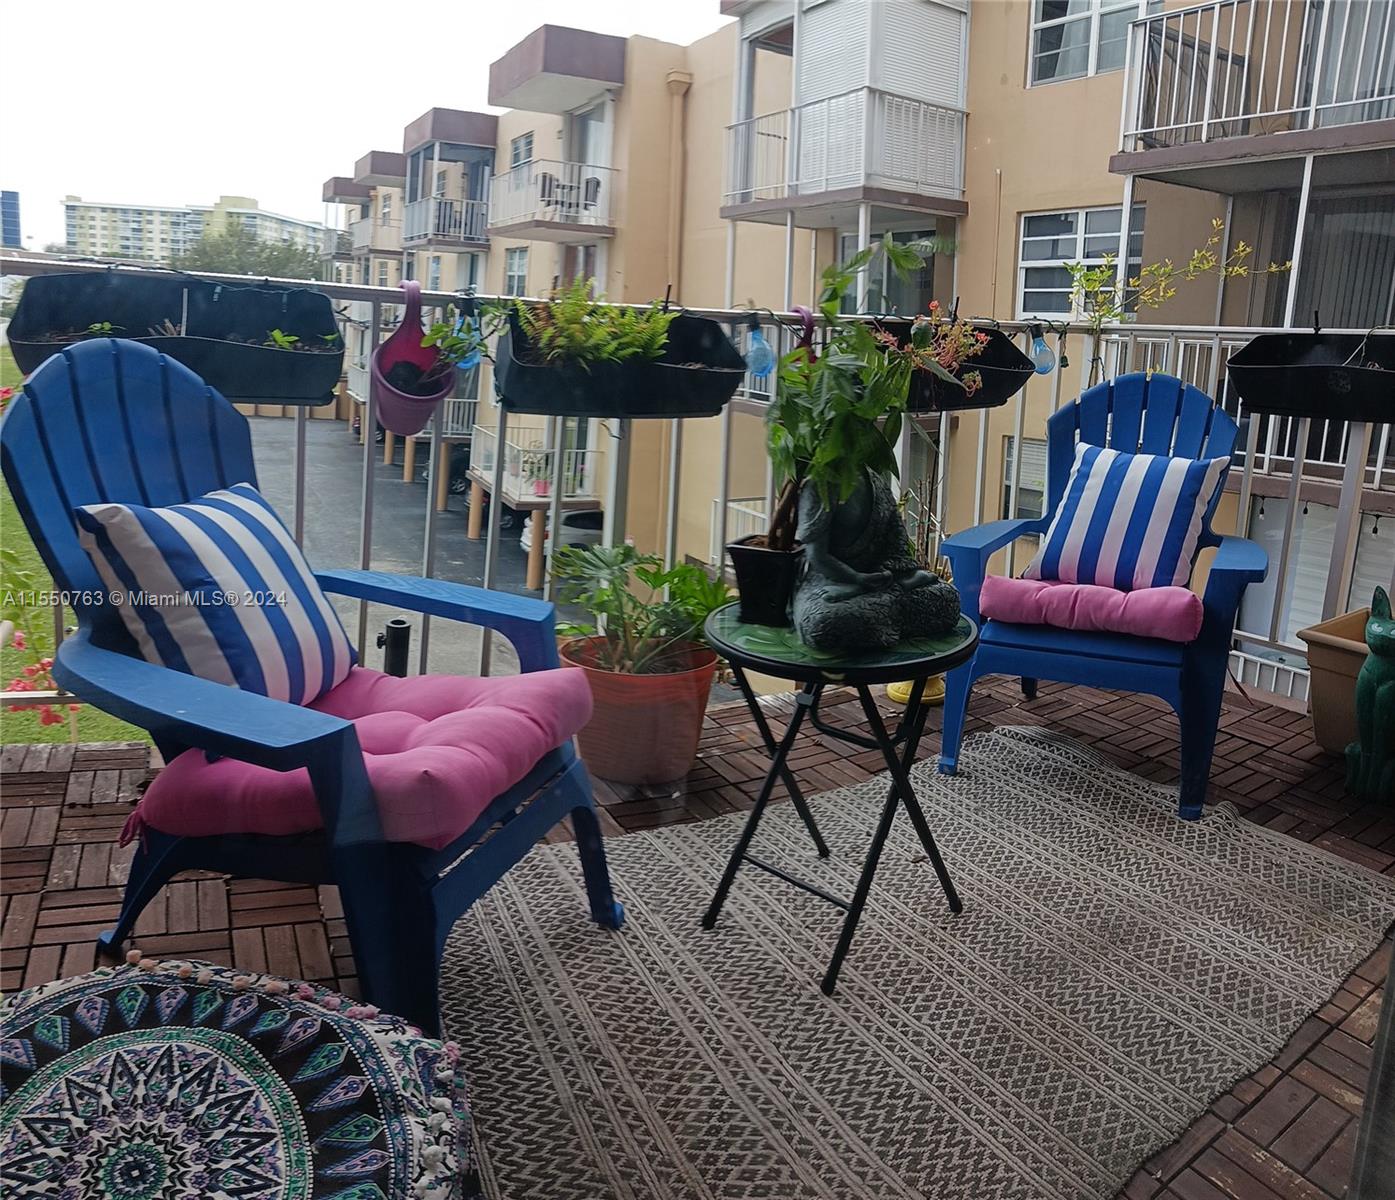 a view of a chairs and tables in patio